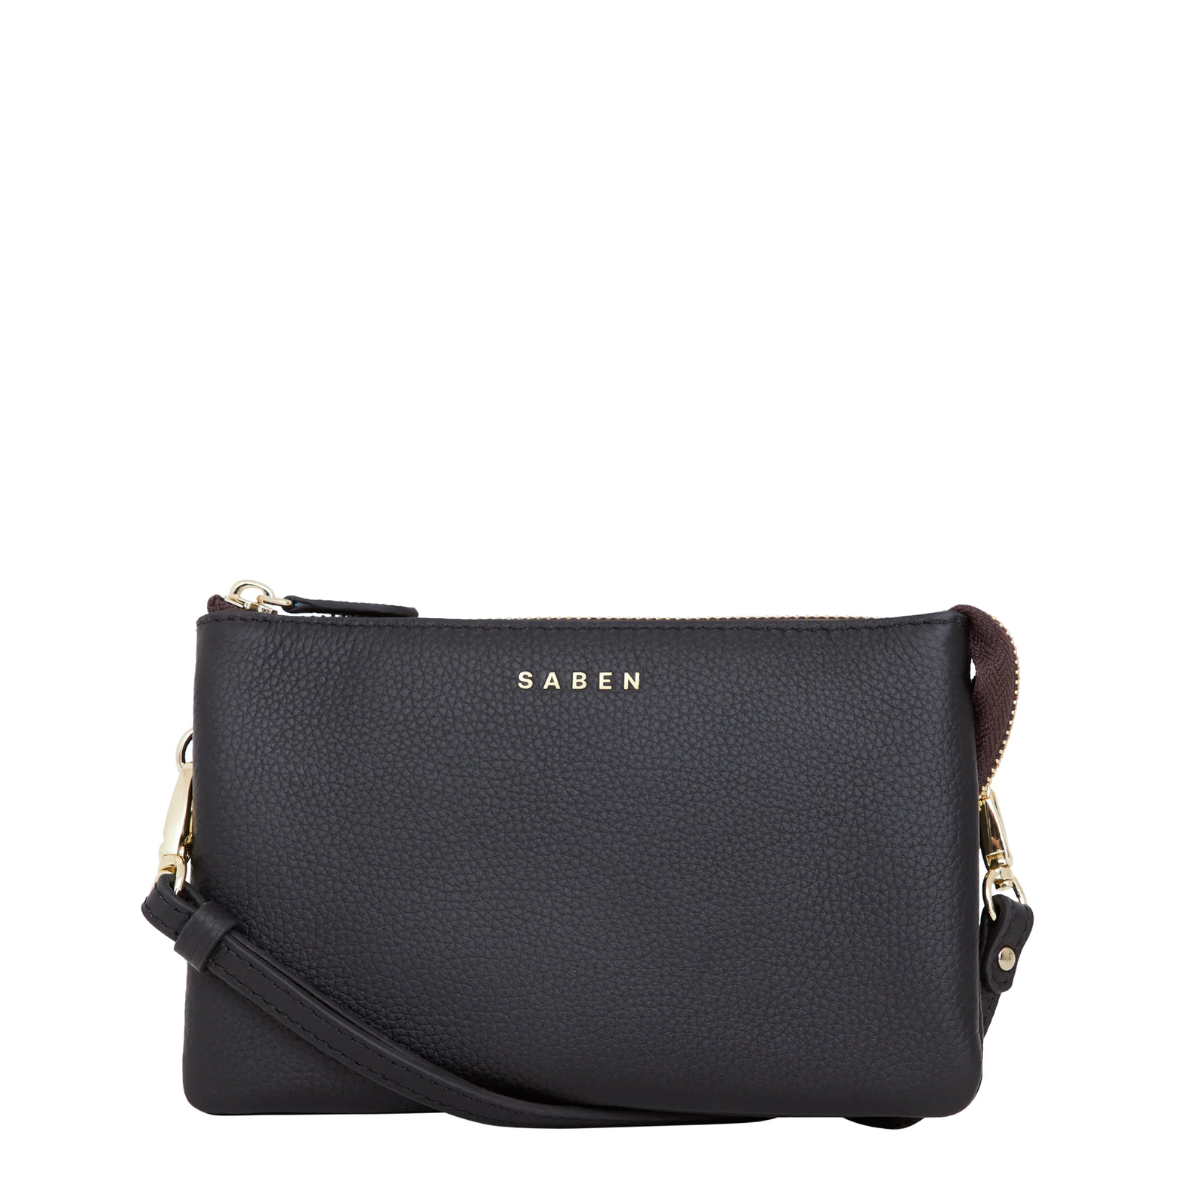 Saben Tilly Crossbody Black - Issimo Shoes